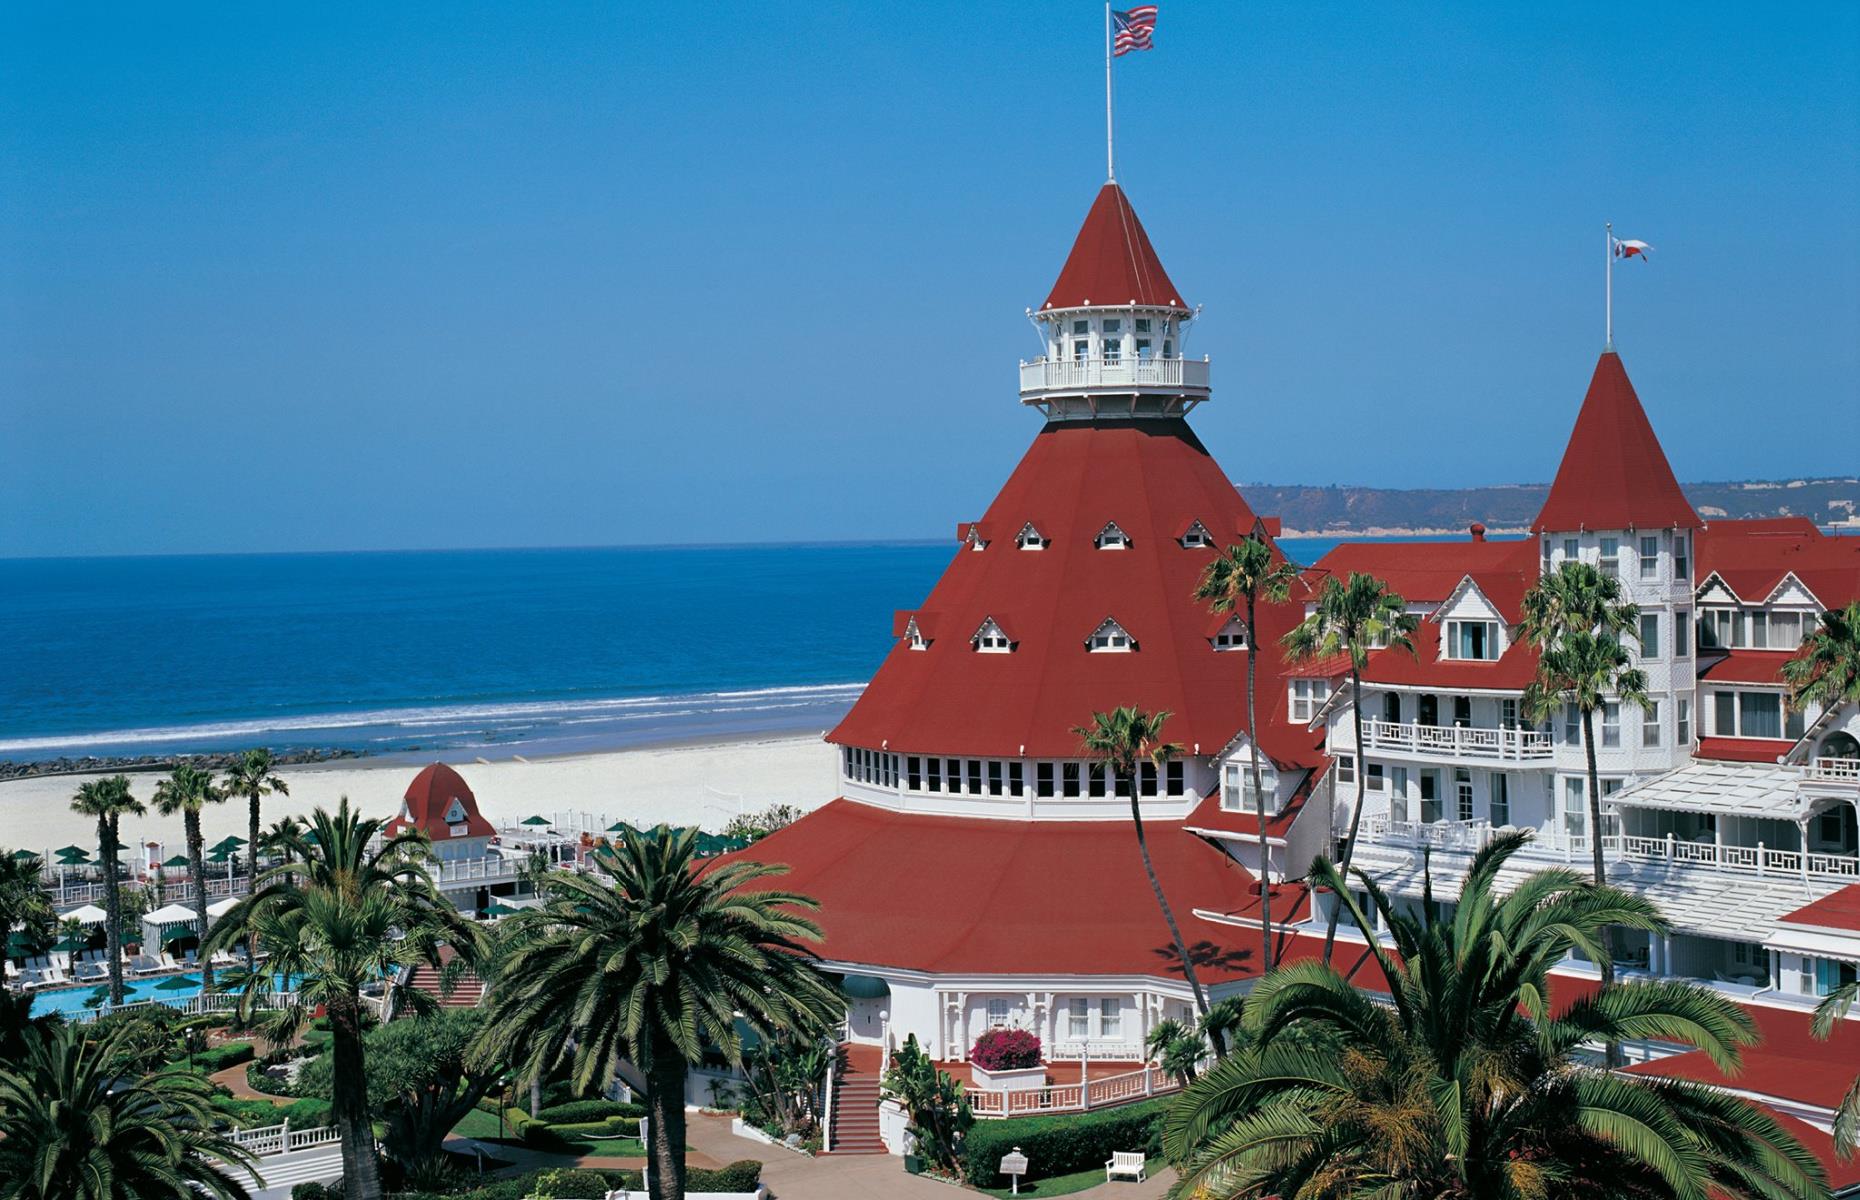 <p>When this San Diego-area hotel opened in 1888, it was heralded for its head-turning Victorian architecture and stunning spot on the Pacific coast. The hotel has since expanded to include cabanas and villas to stay in, as well as the brand-new The Views property. But all of the accommodation options at <a href="https://hoteldel.com">“The Del”</a> include the opportunity to relax on the pristine beach, engage in watersports and dine at the resort’s various restaurants.</p>  <p><strong><a href="http://bit.ly/3roL4wv">Love this? Follow our Facebook page for more travel inspiration</a></strong></p>